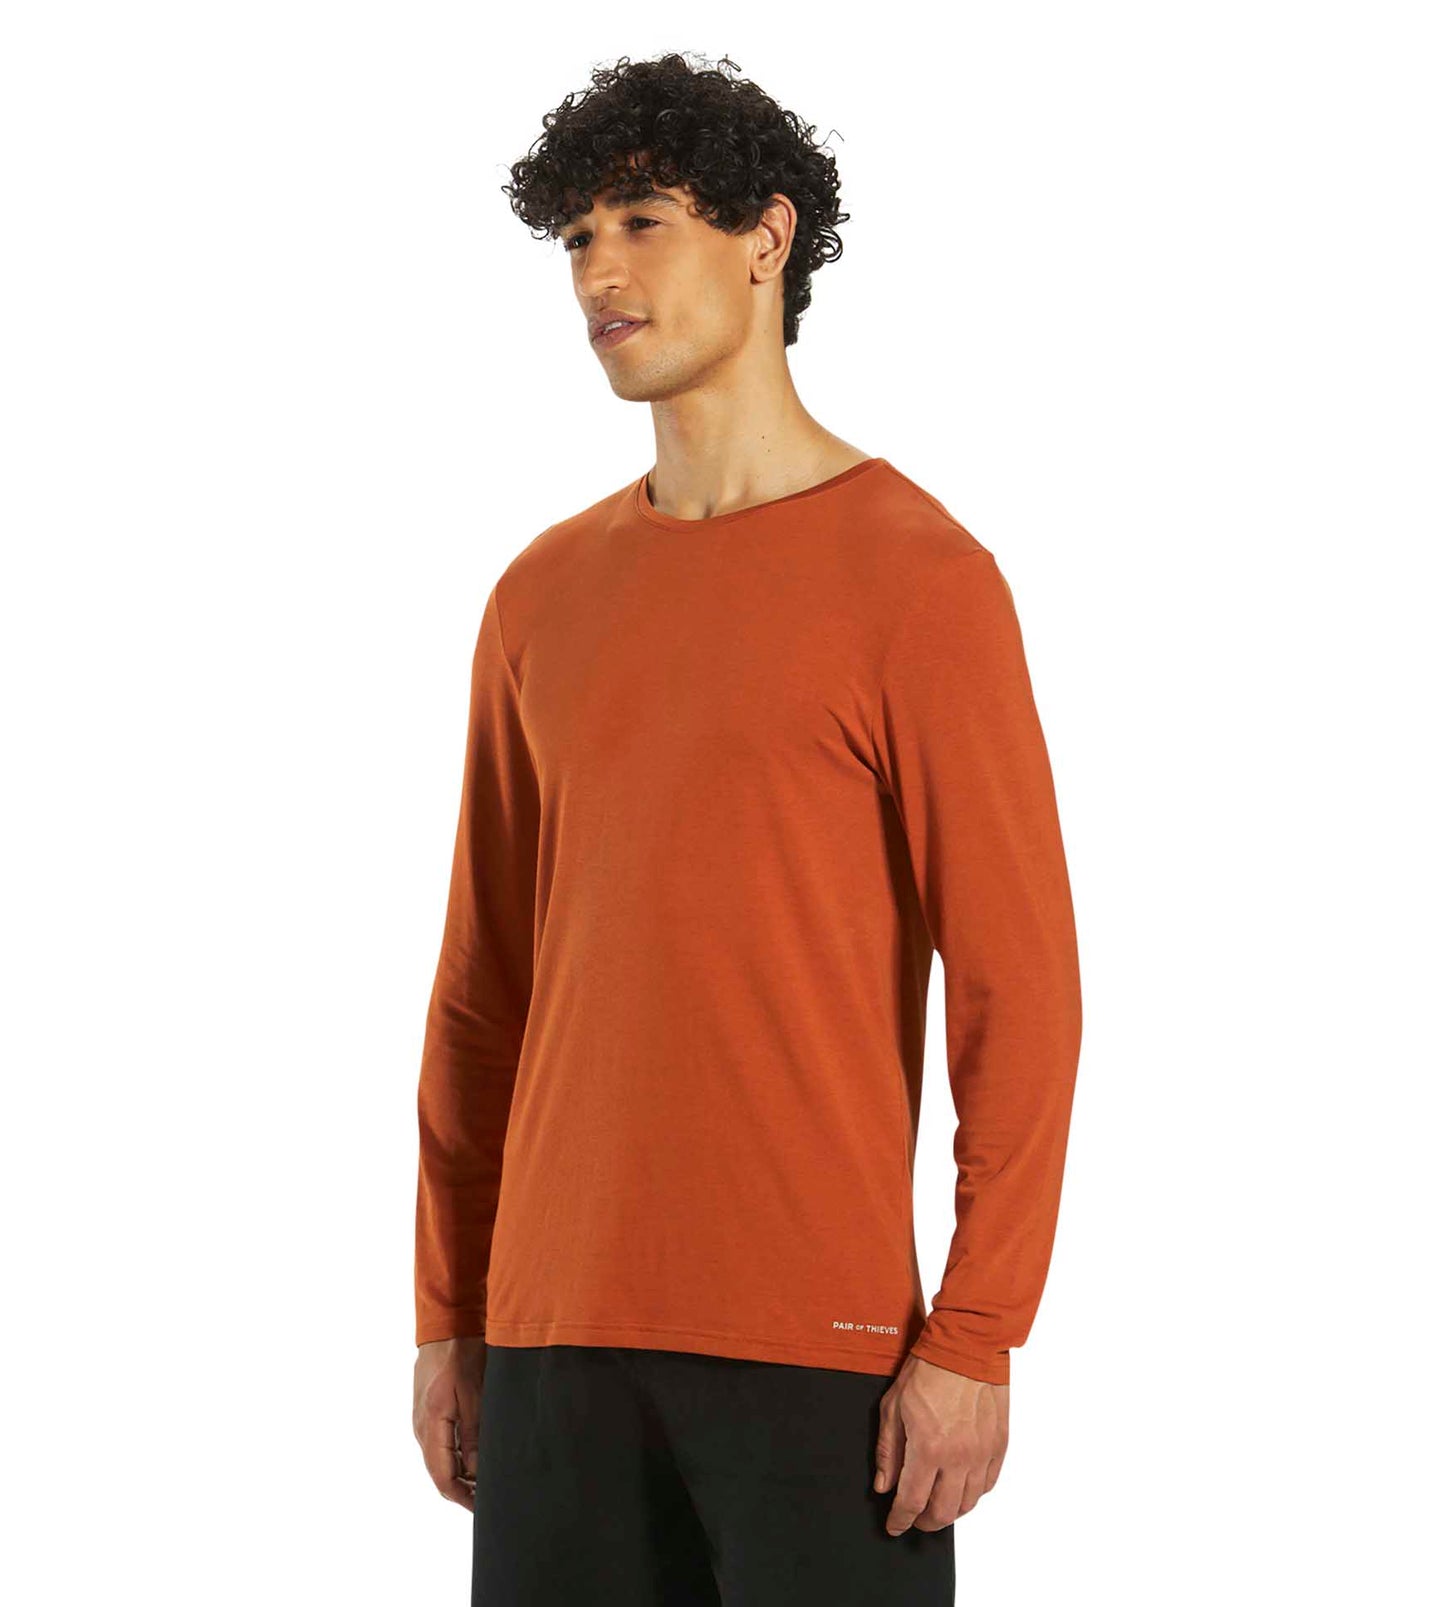 SuperSoft Long Sleeve Crew Neck Tee colors contain: Sienna, Black, Peru, Maroon, Chocolate, Indian red, Dark slate gray, Saddle brown, Burly wood